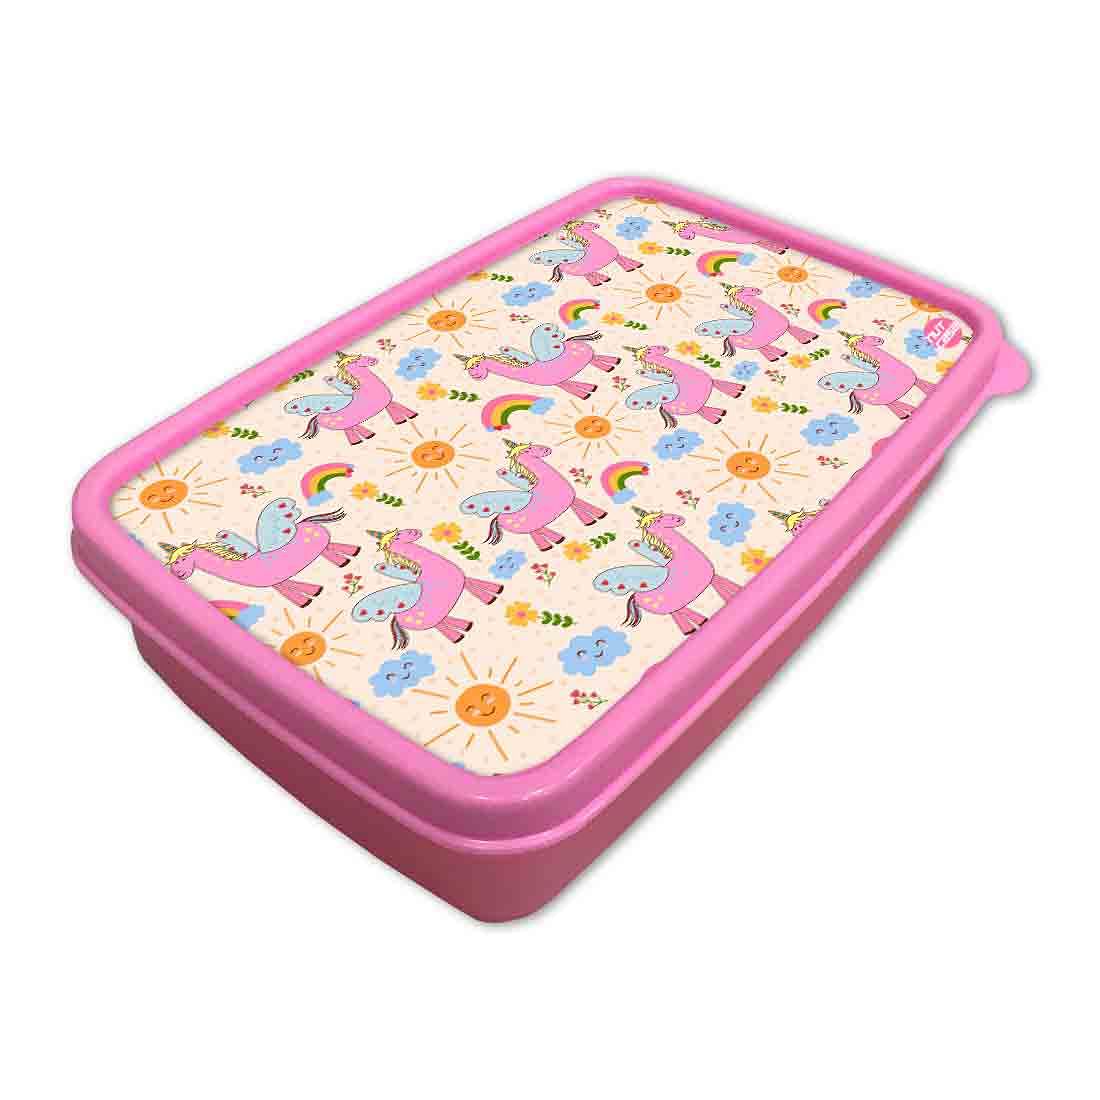 Kids Lunch Box for School Return Gifts Birthday Party - Pink Unicorn Nutcase